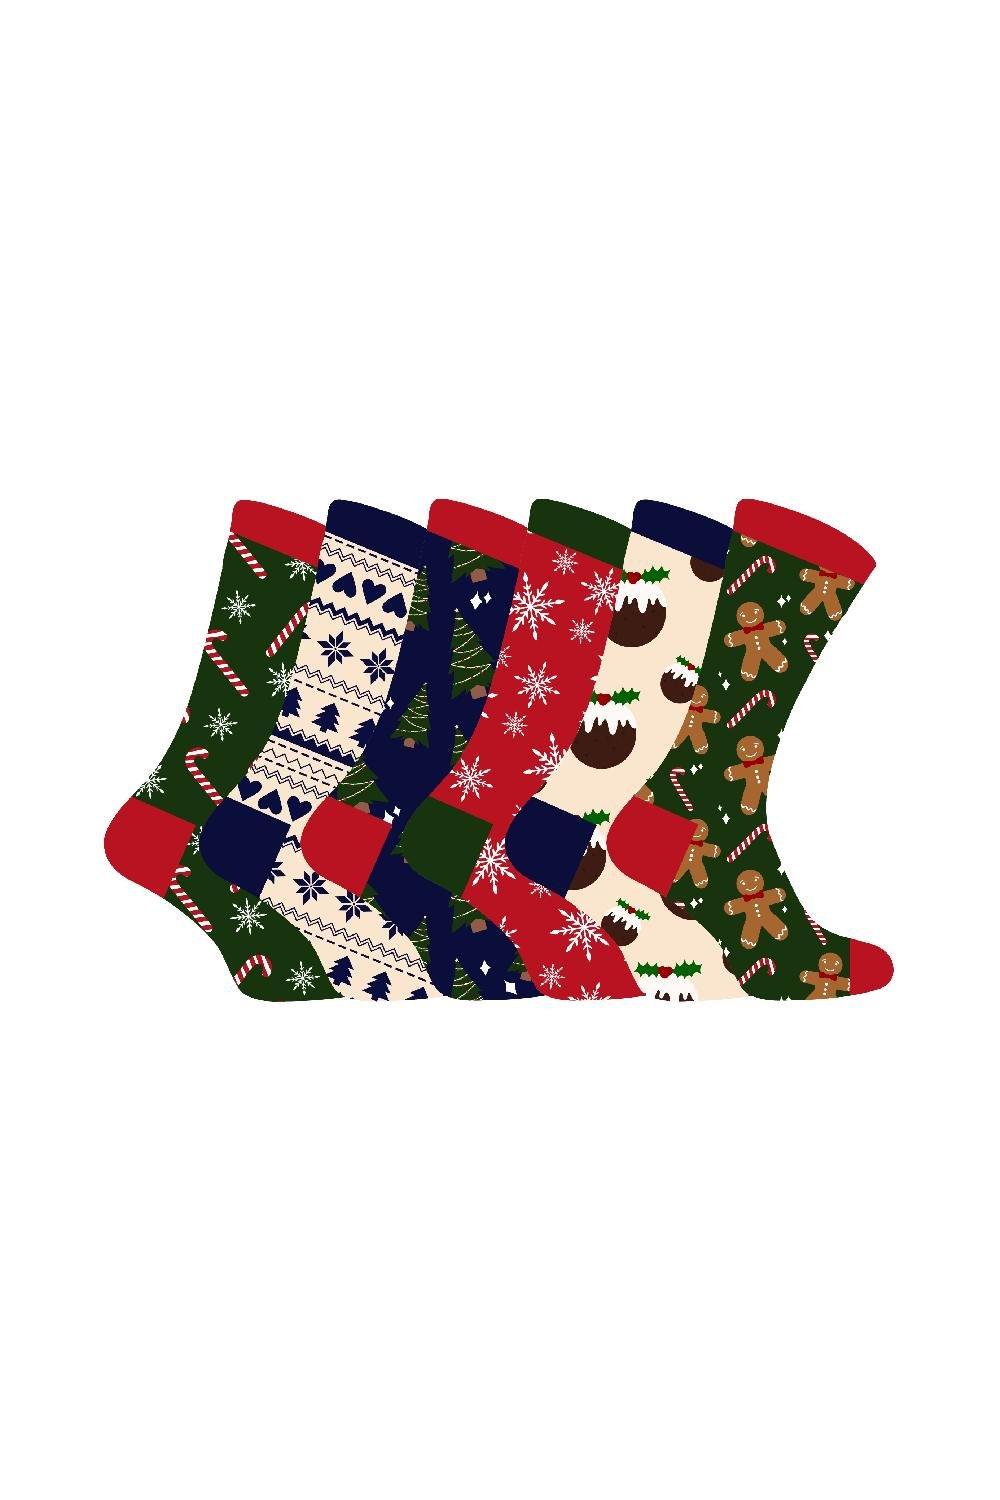 6 Pairs Christmas Patterned Novelty Colourful Crew Socks